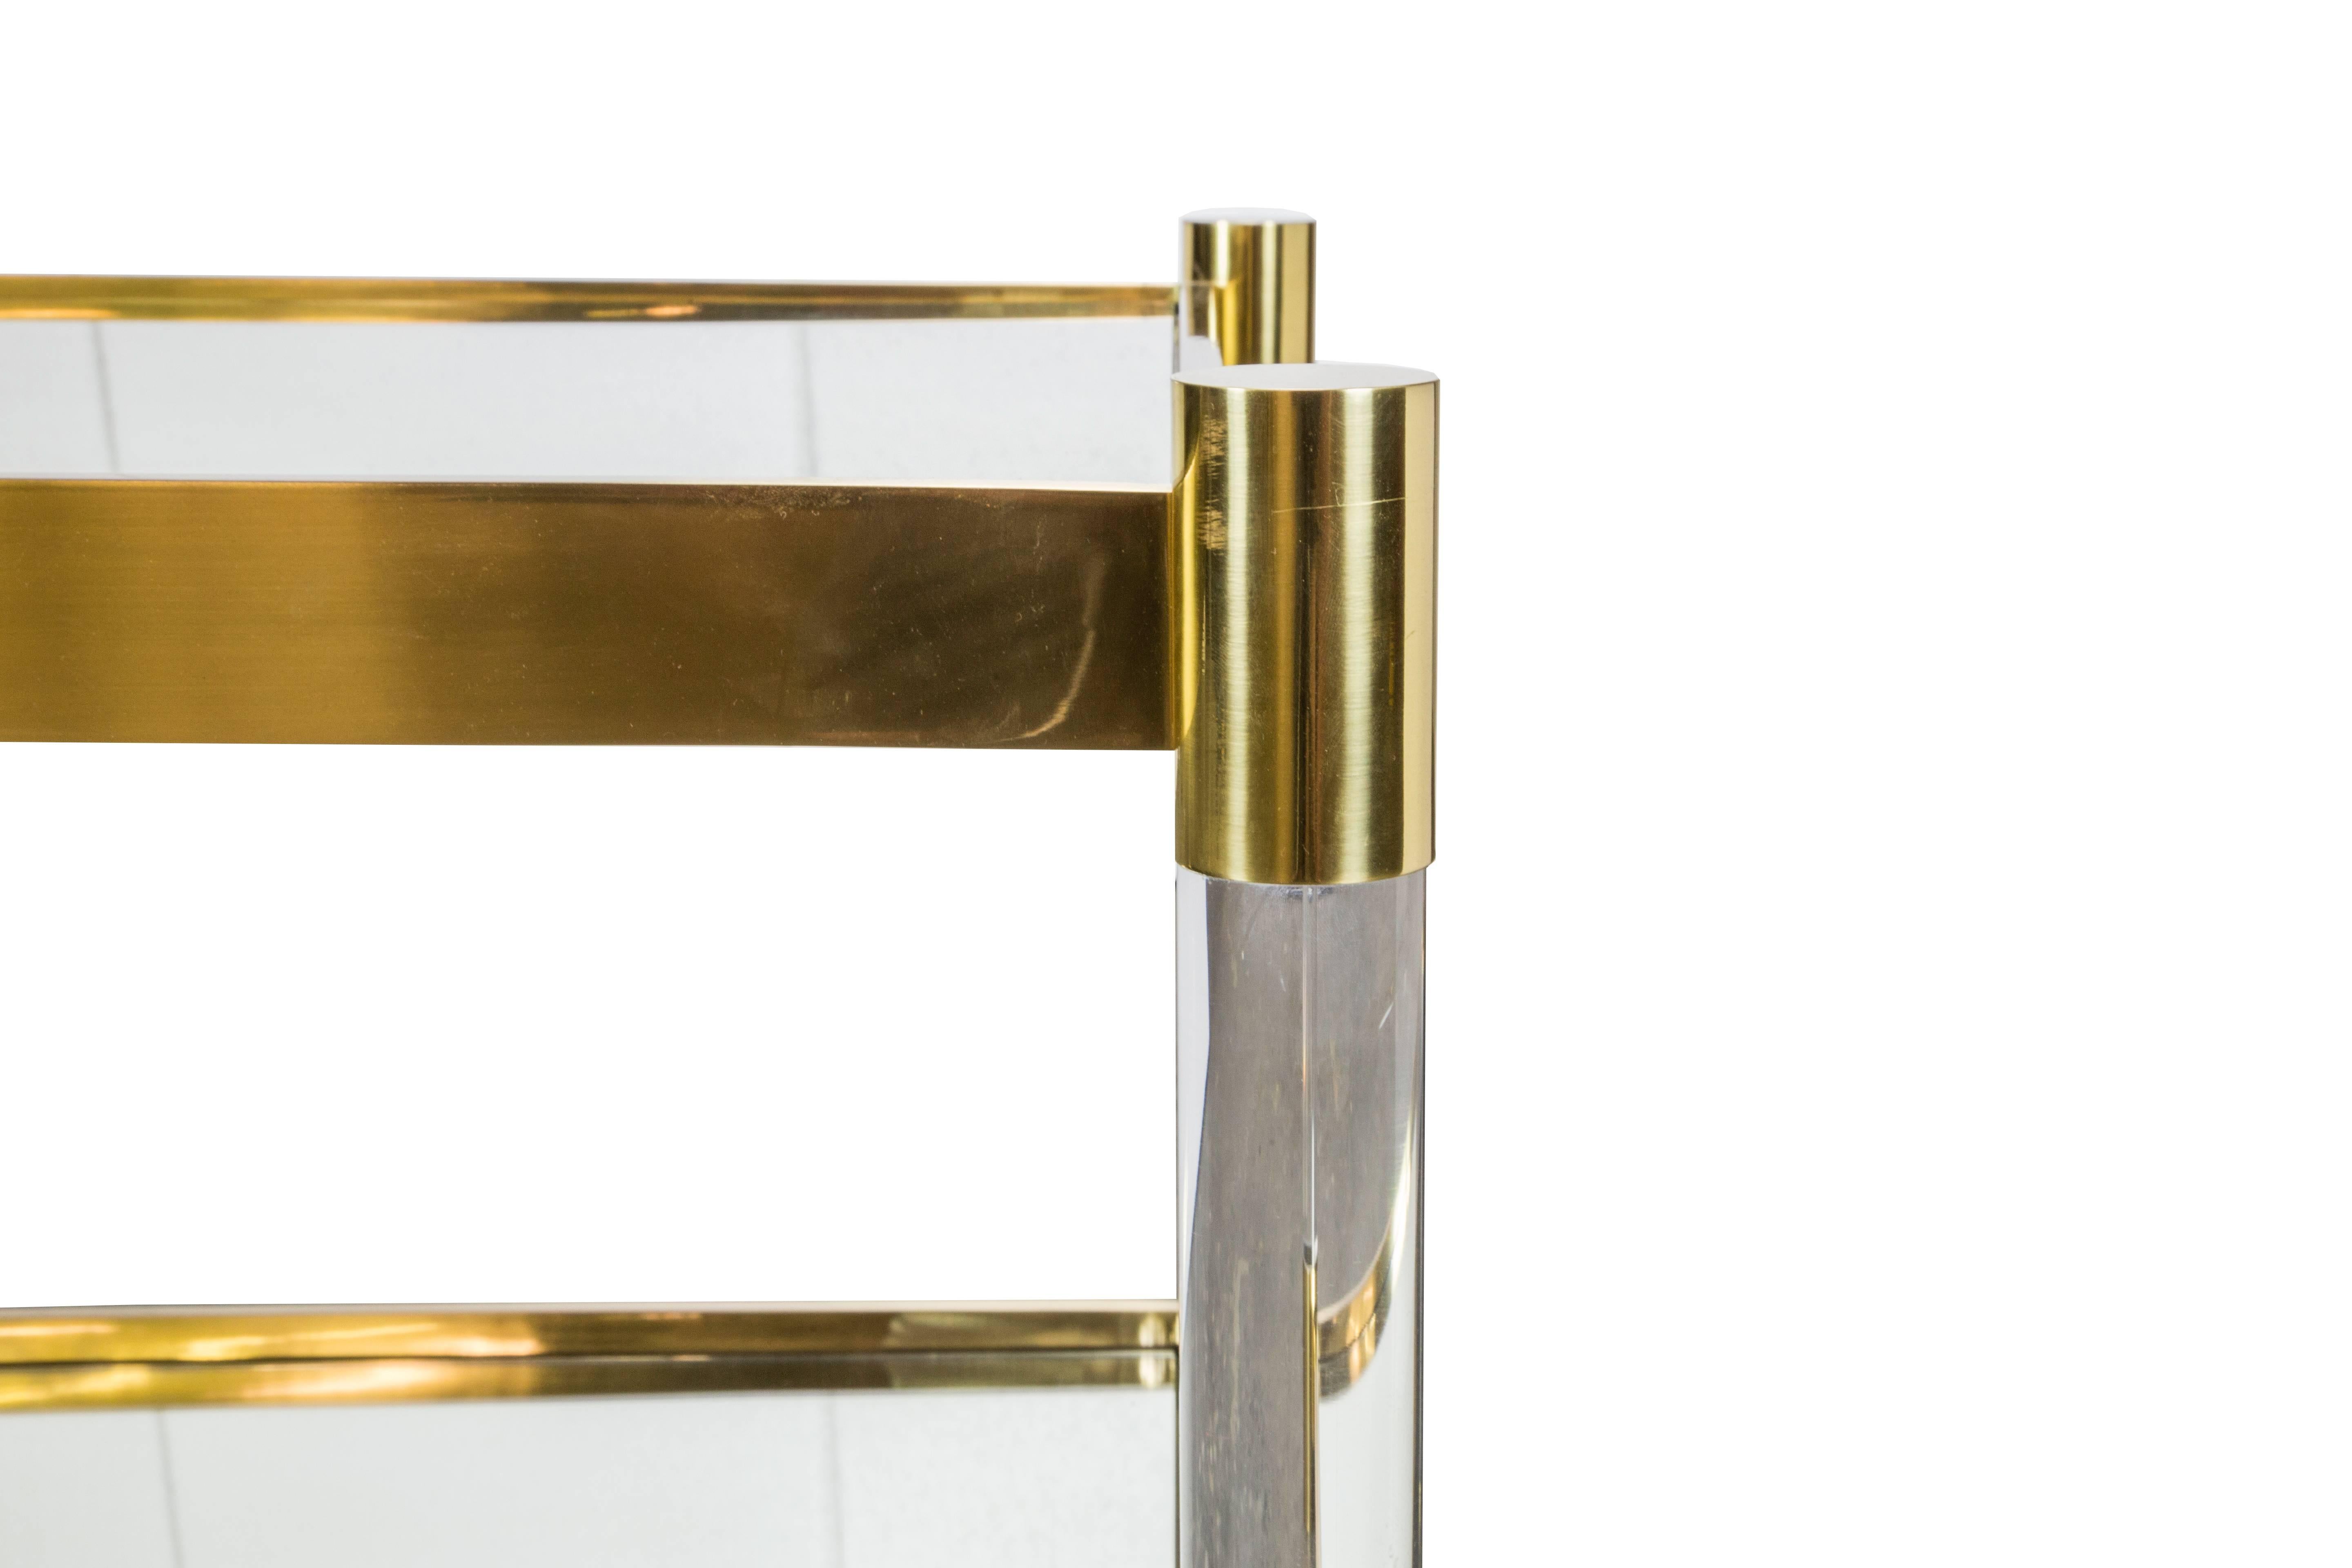 Solid brass and Plexi/Lucite cocktail table. Superb quality with solid brass satin finish. Mirrored glass inserts on top and bottom. This item is custom and one of a kind.